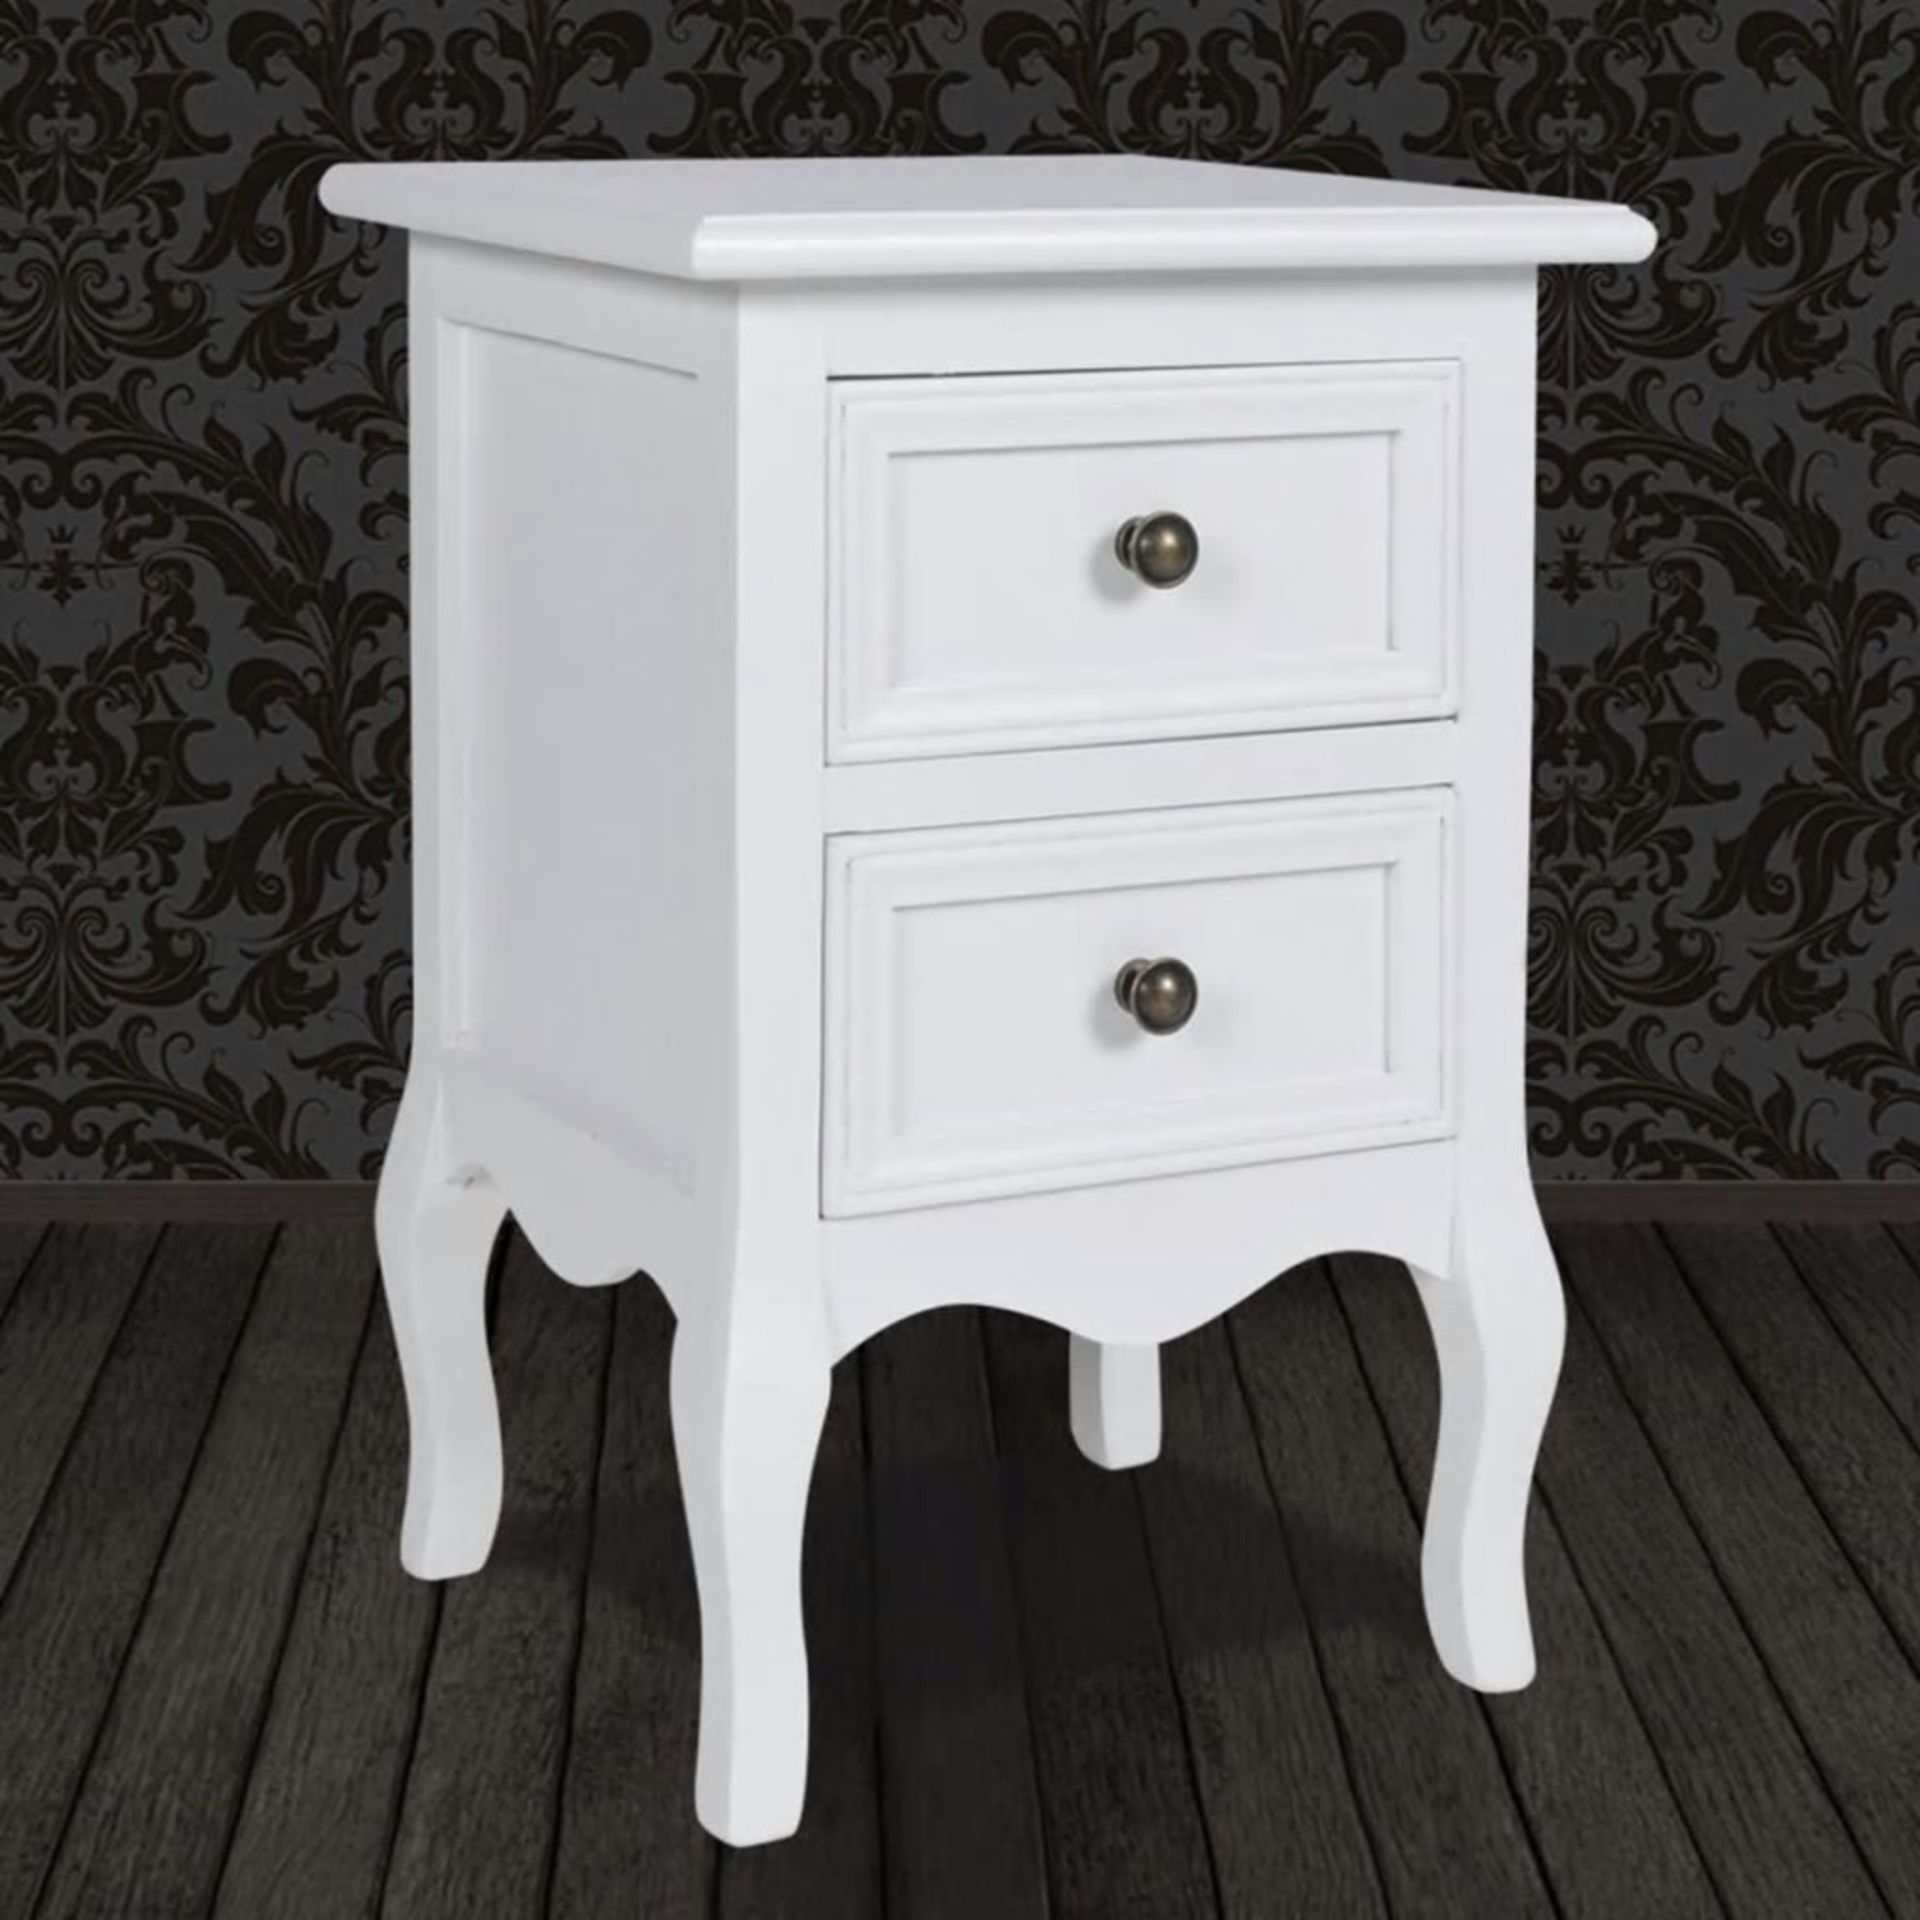 Anner 2 Drawer Bedside Table - RRP £115.99 - Image 2 of 5